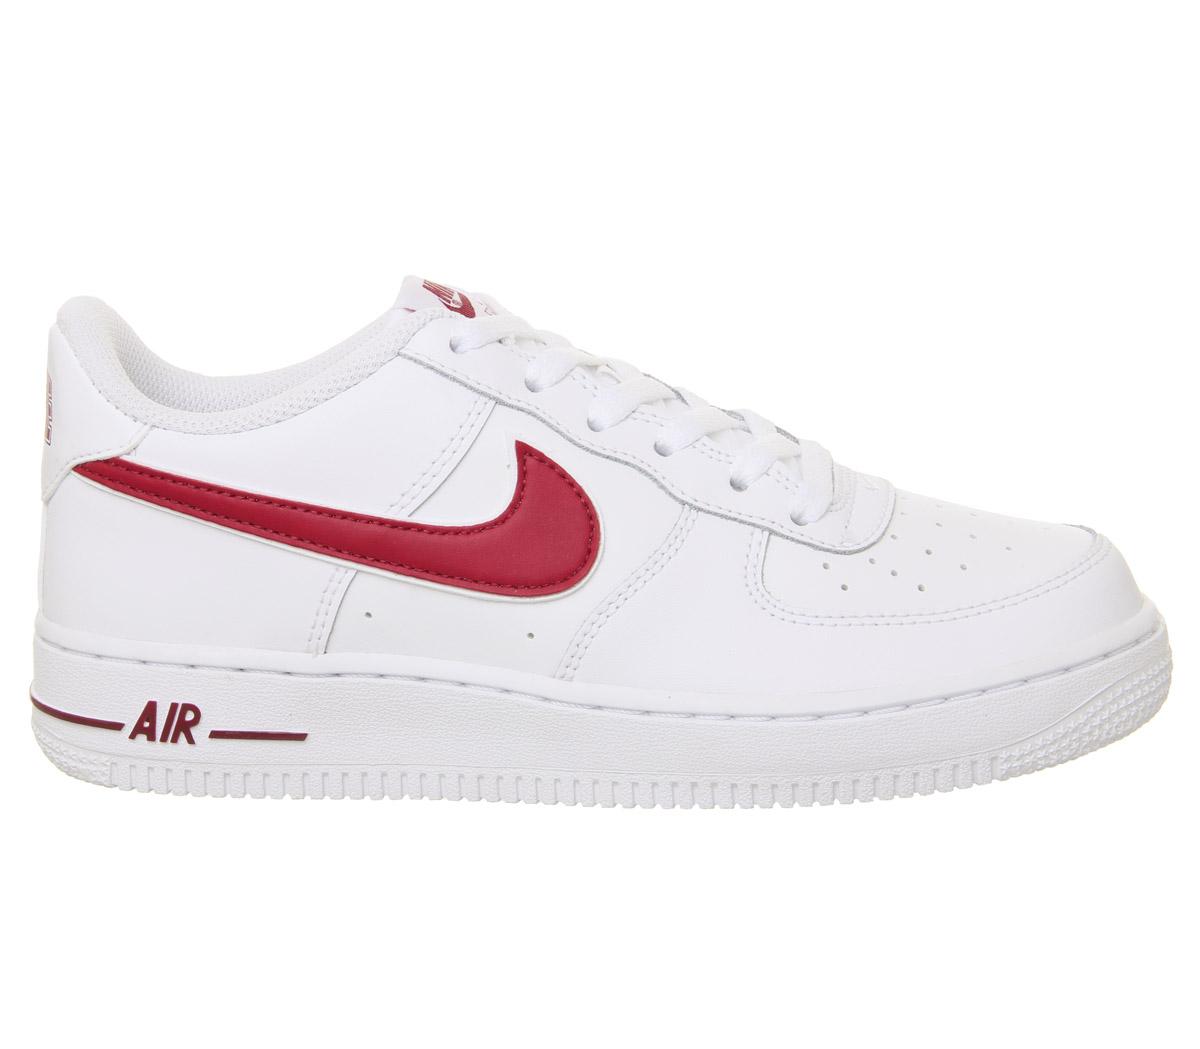 Nike Air Force 1 Trainers White Red - Women's Trainers